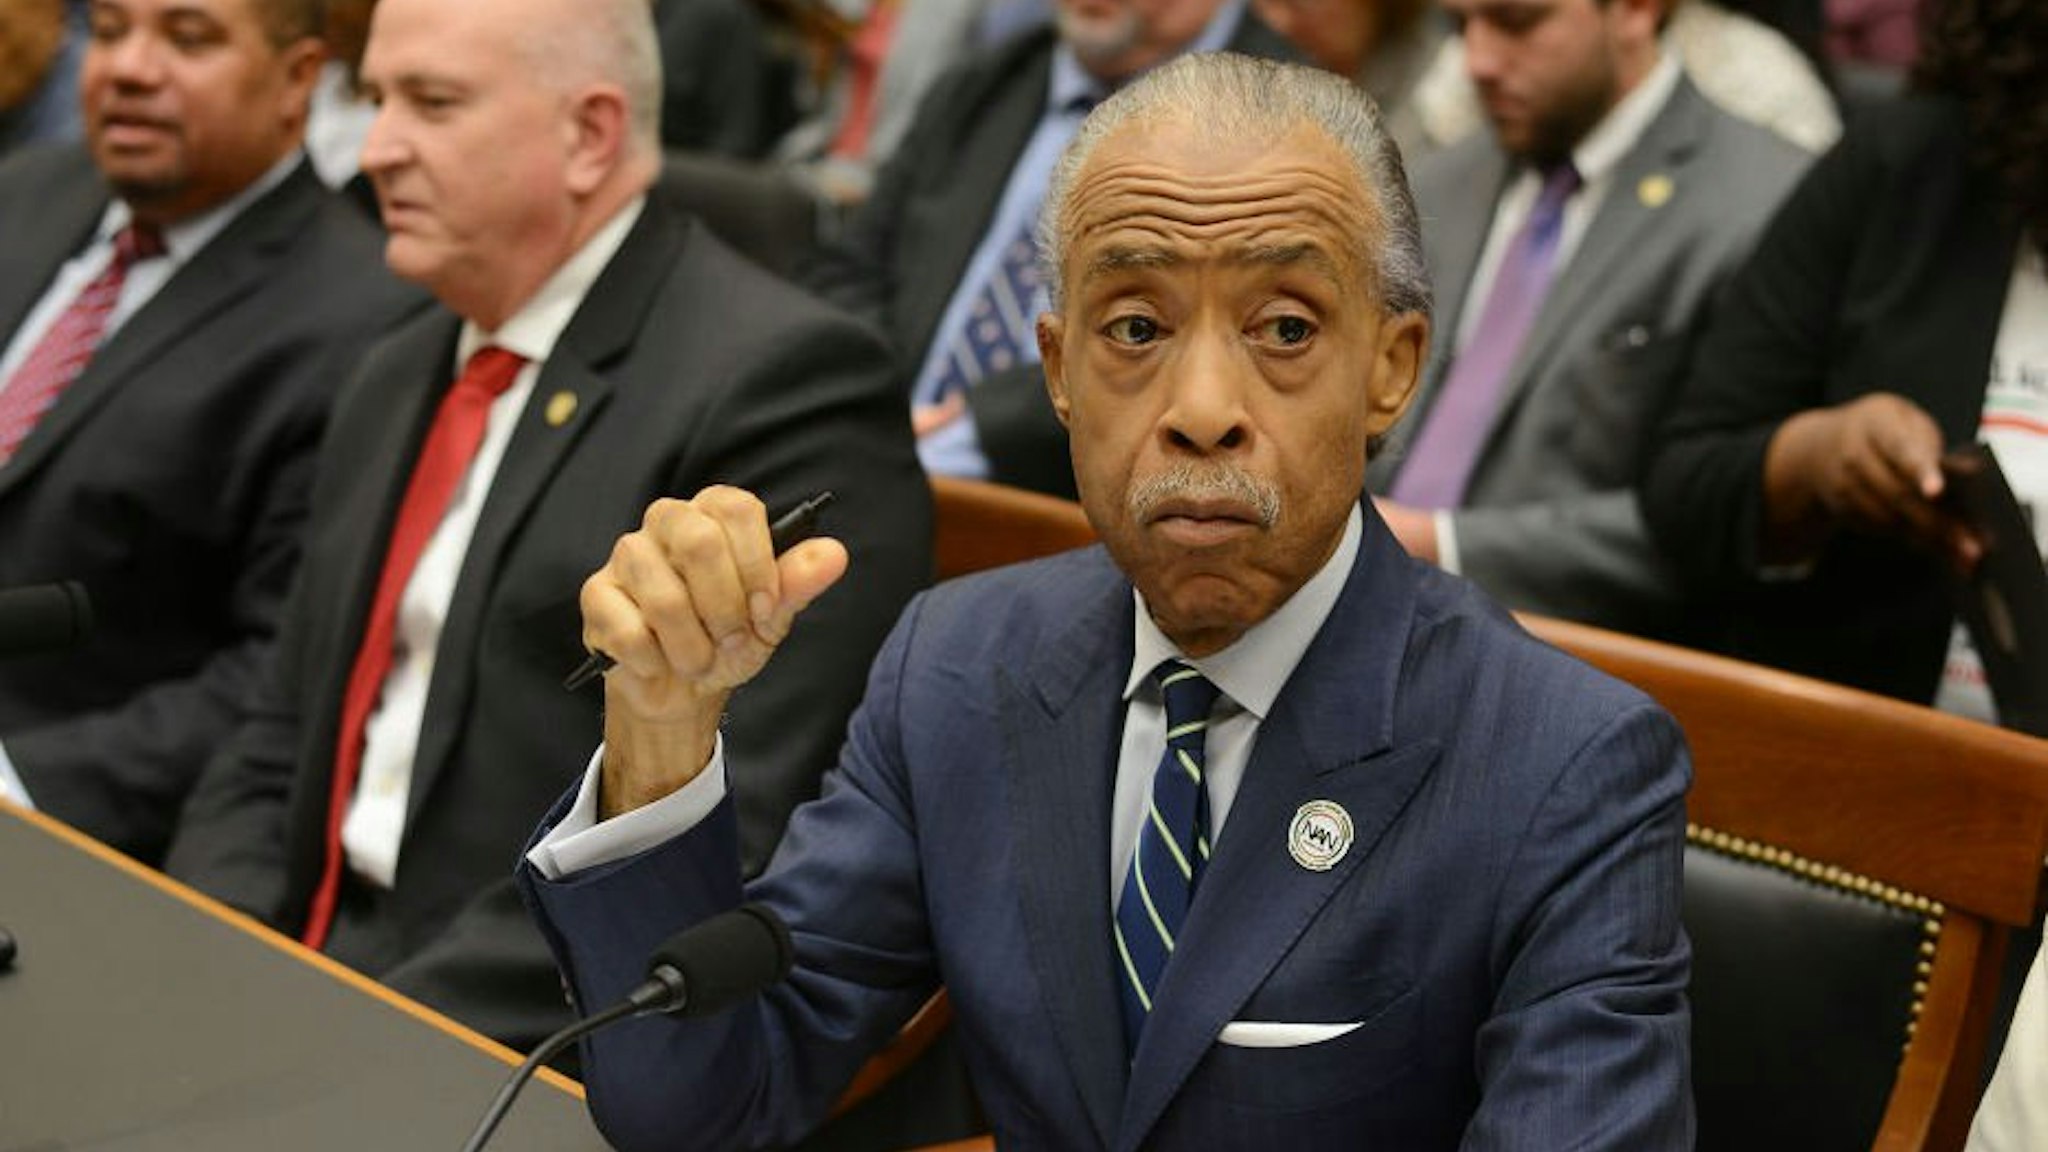 Rev. Al Sharpton testifies before the House Judiciary Committee on policing practices in the United States on September 19, 2019 in Washington, DC.